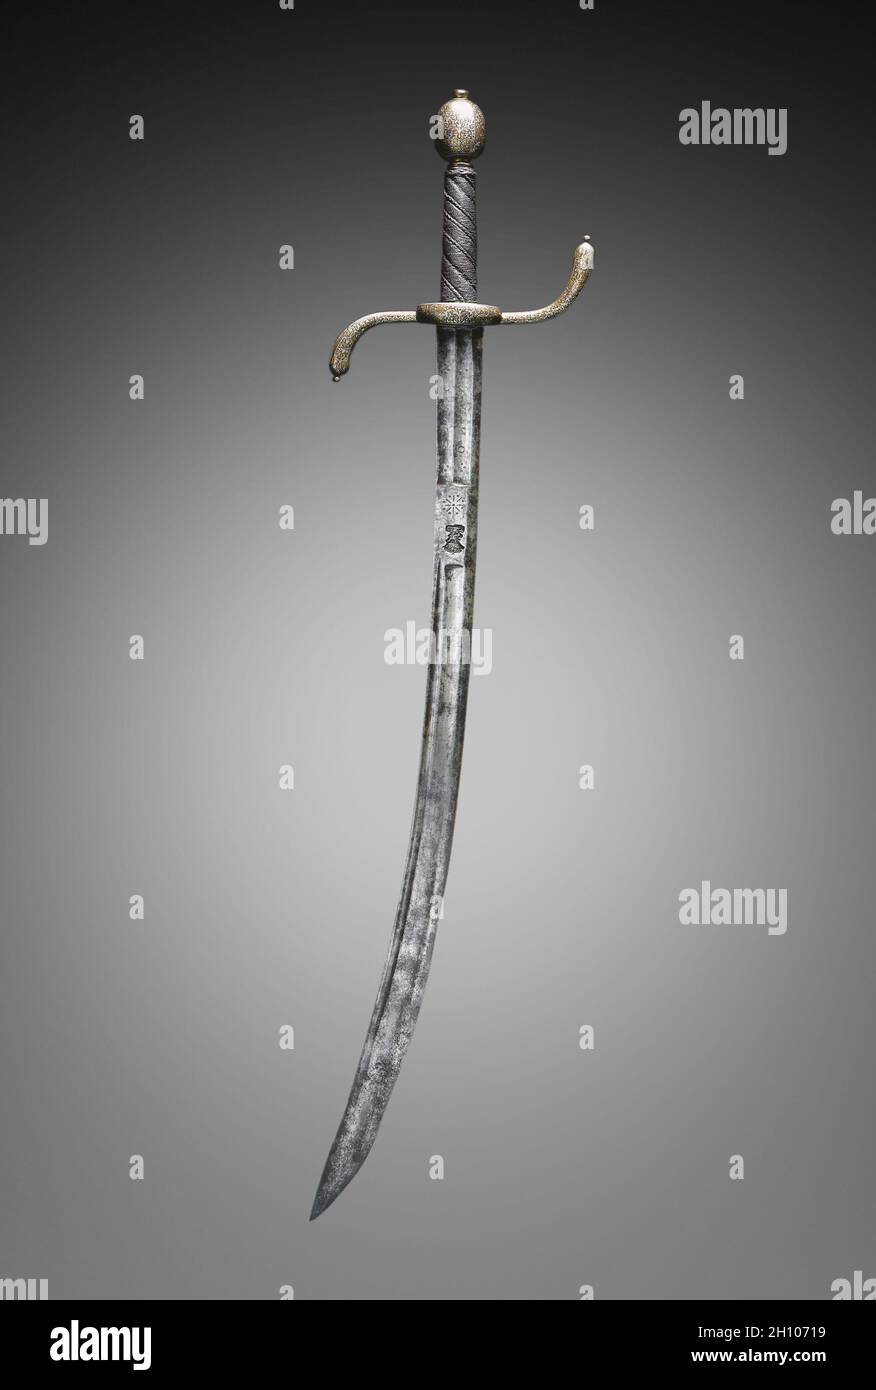 Hanger (Hunting Sword), late 1600s. Jaspar Bongen the Younger (German, active late 1600s). Steel; gold and silver damascened hilt; overall: 73 cm (28 3/4 in.); blade: 57.7 cm (22 11/16 in.); quillions: 17.5 cm (6 7/8 in.).  Damascening, the technique of hammering gold and silver wires into grooves cut to receive them, enlivens this sword's hilt. Further texture was added with wires to improve the user's grip, which allowed him to hunt with more control and accuracy. Hunting was a popular sport among the wealthy and many nobles owned tracts of forest, but peasants were prohibited from hunting o Stock Photo